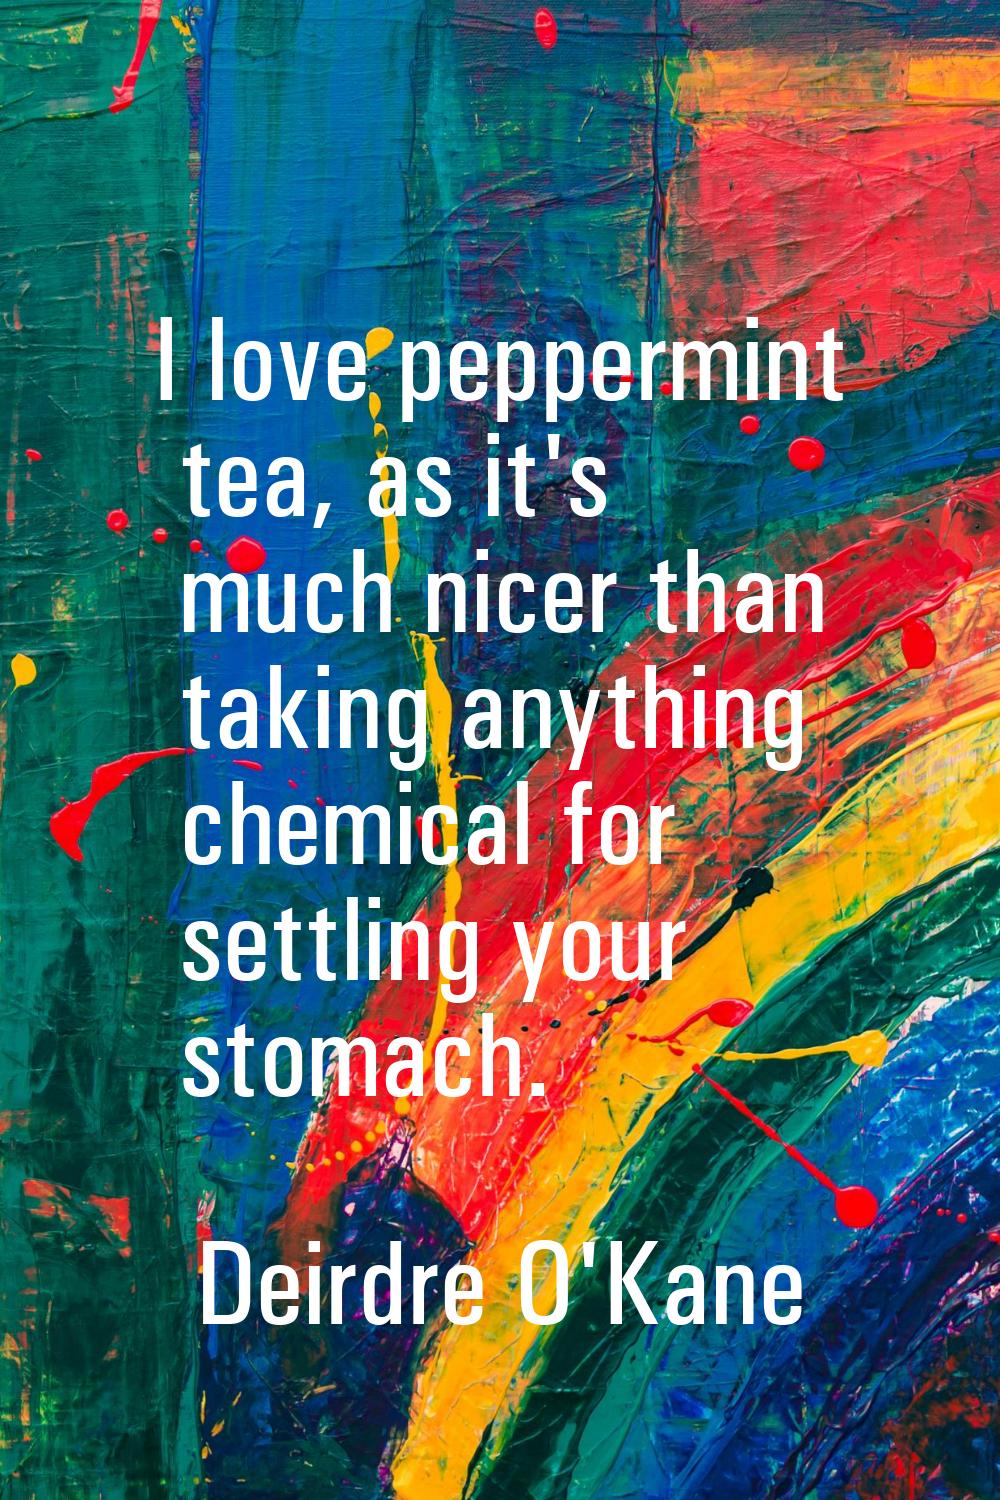 I love peppermint tea, as it's much nicer than taking anything chemical for settling your stomach.